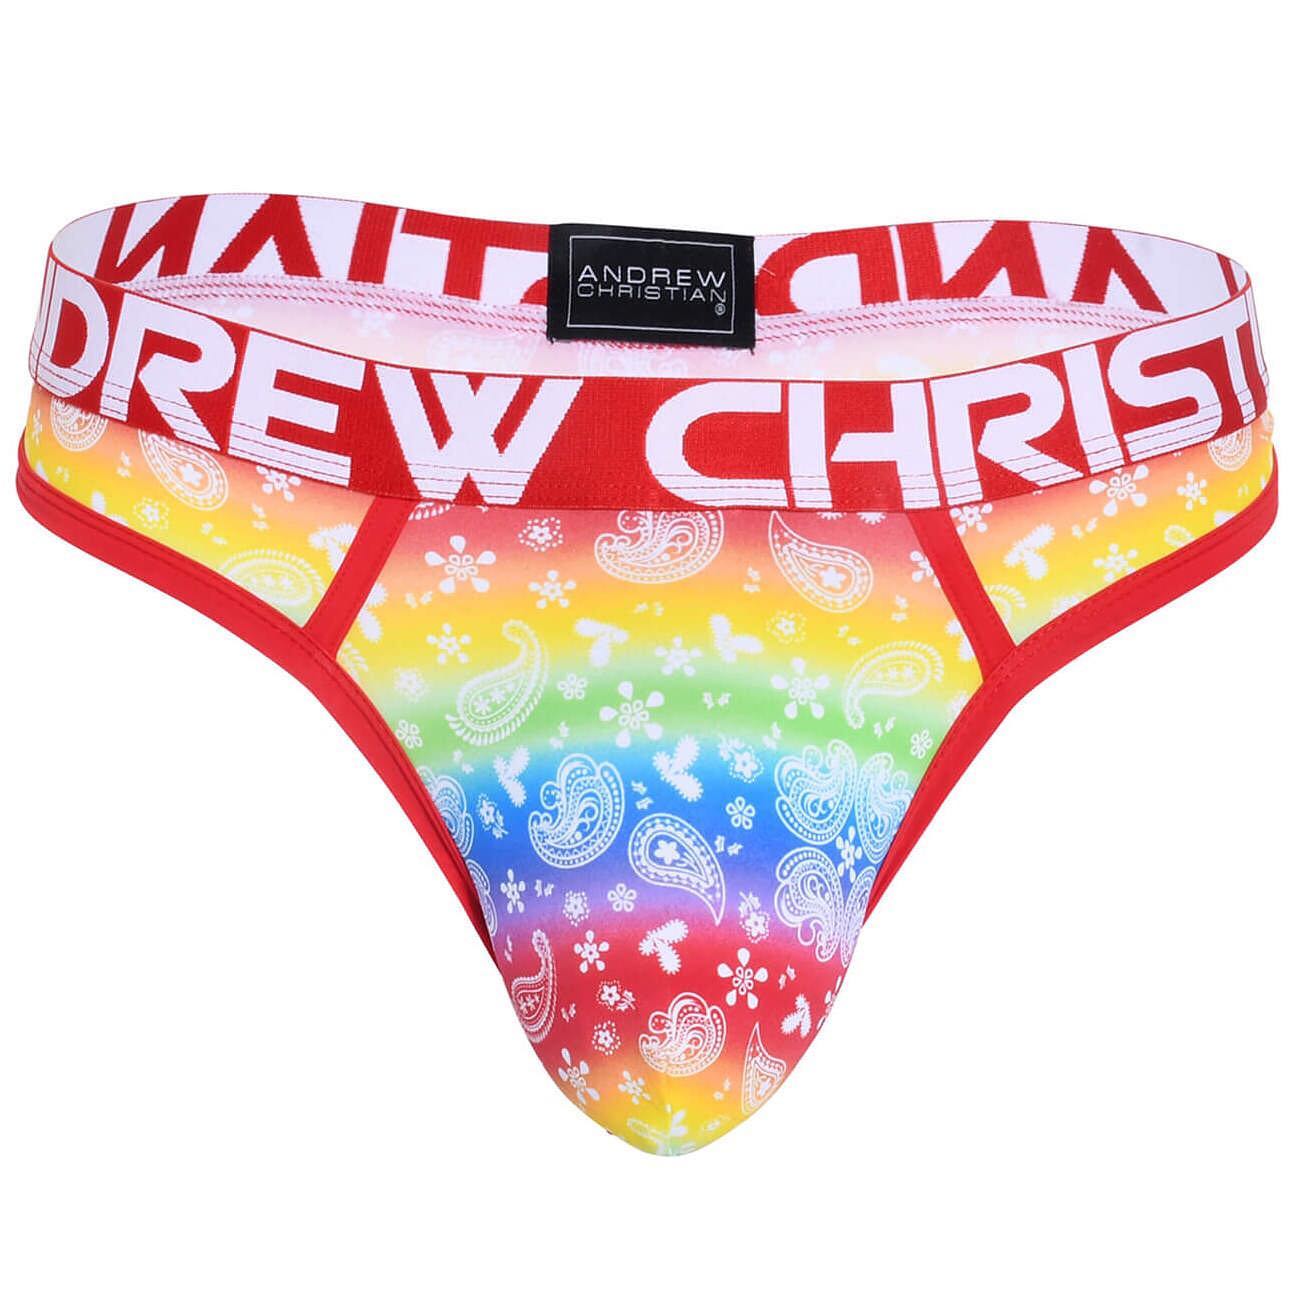 An explosion of colours and vibes of past, happy times! Get in the mood to party with the amazing and vibrant Bandana Pride Thong from Andrew Christian:
____
https://menandunderwear.com/shop/underwear/andrew-christian-bandana-pride-thong-w-almost-naked
____
#andrewchristian #bandana #pride #rainbow #thong #shopping